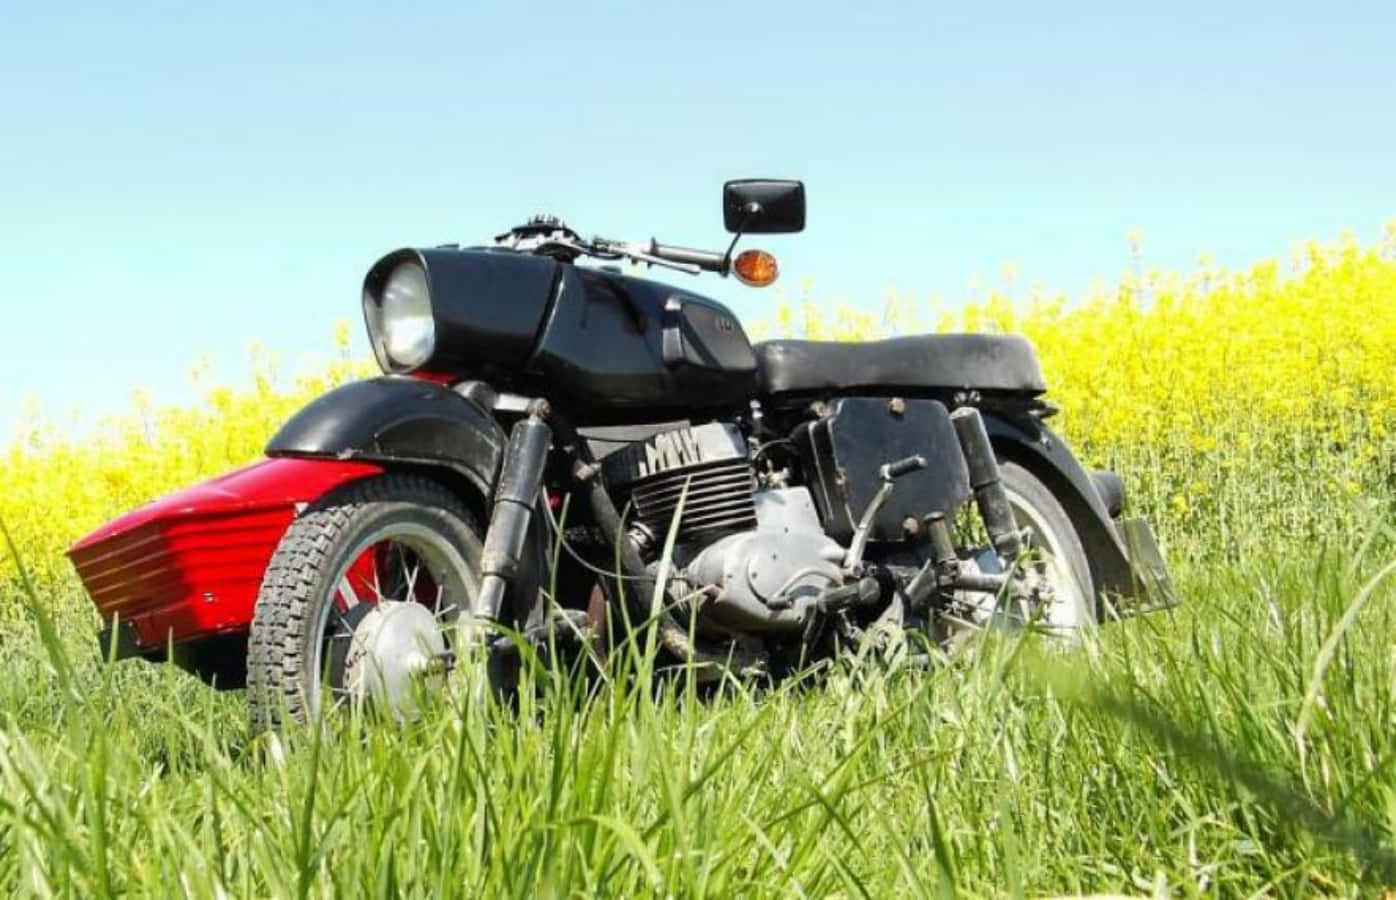 Vintage M Z Motorcycle With Sidecar In Field Wallpaper